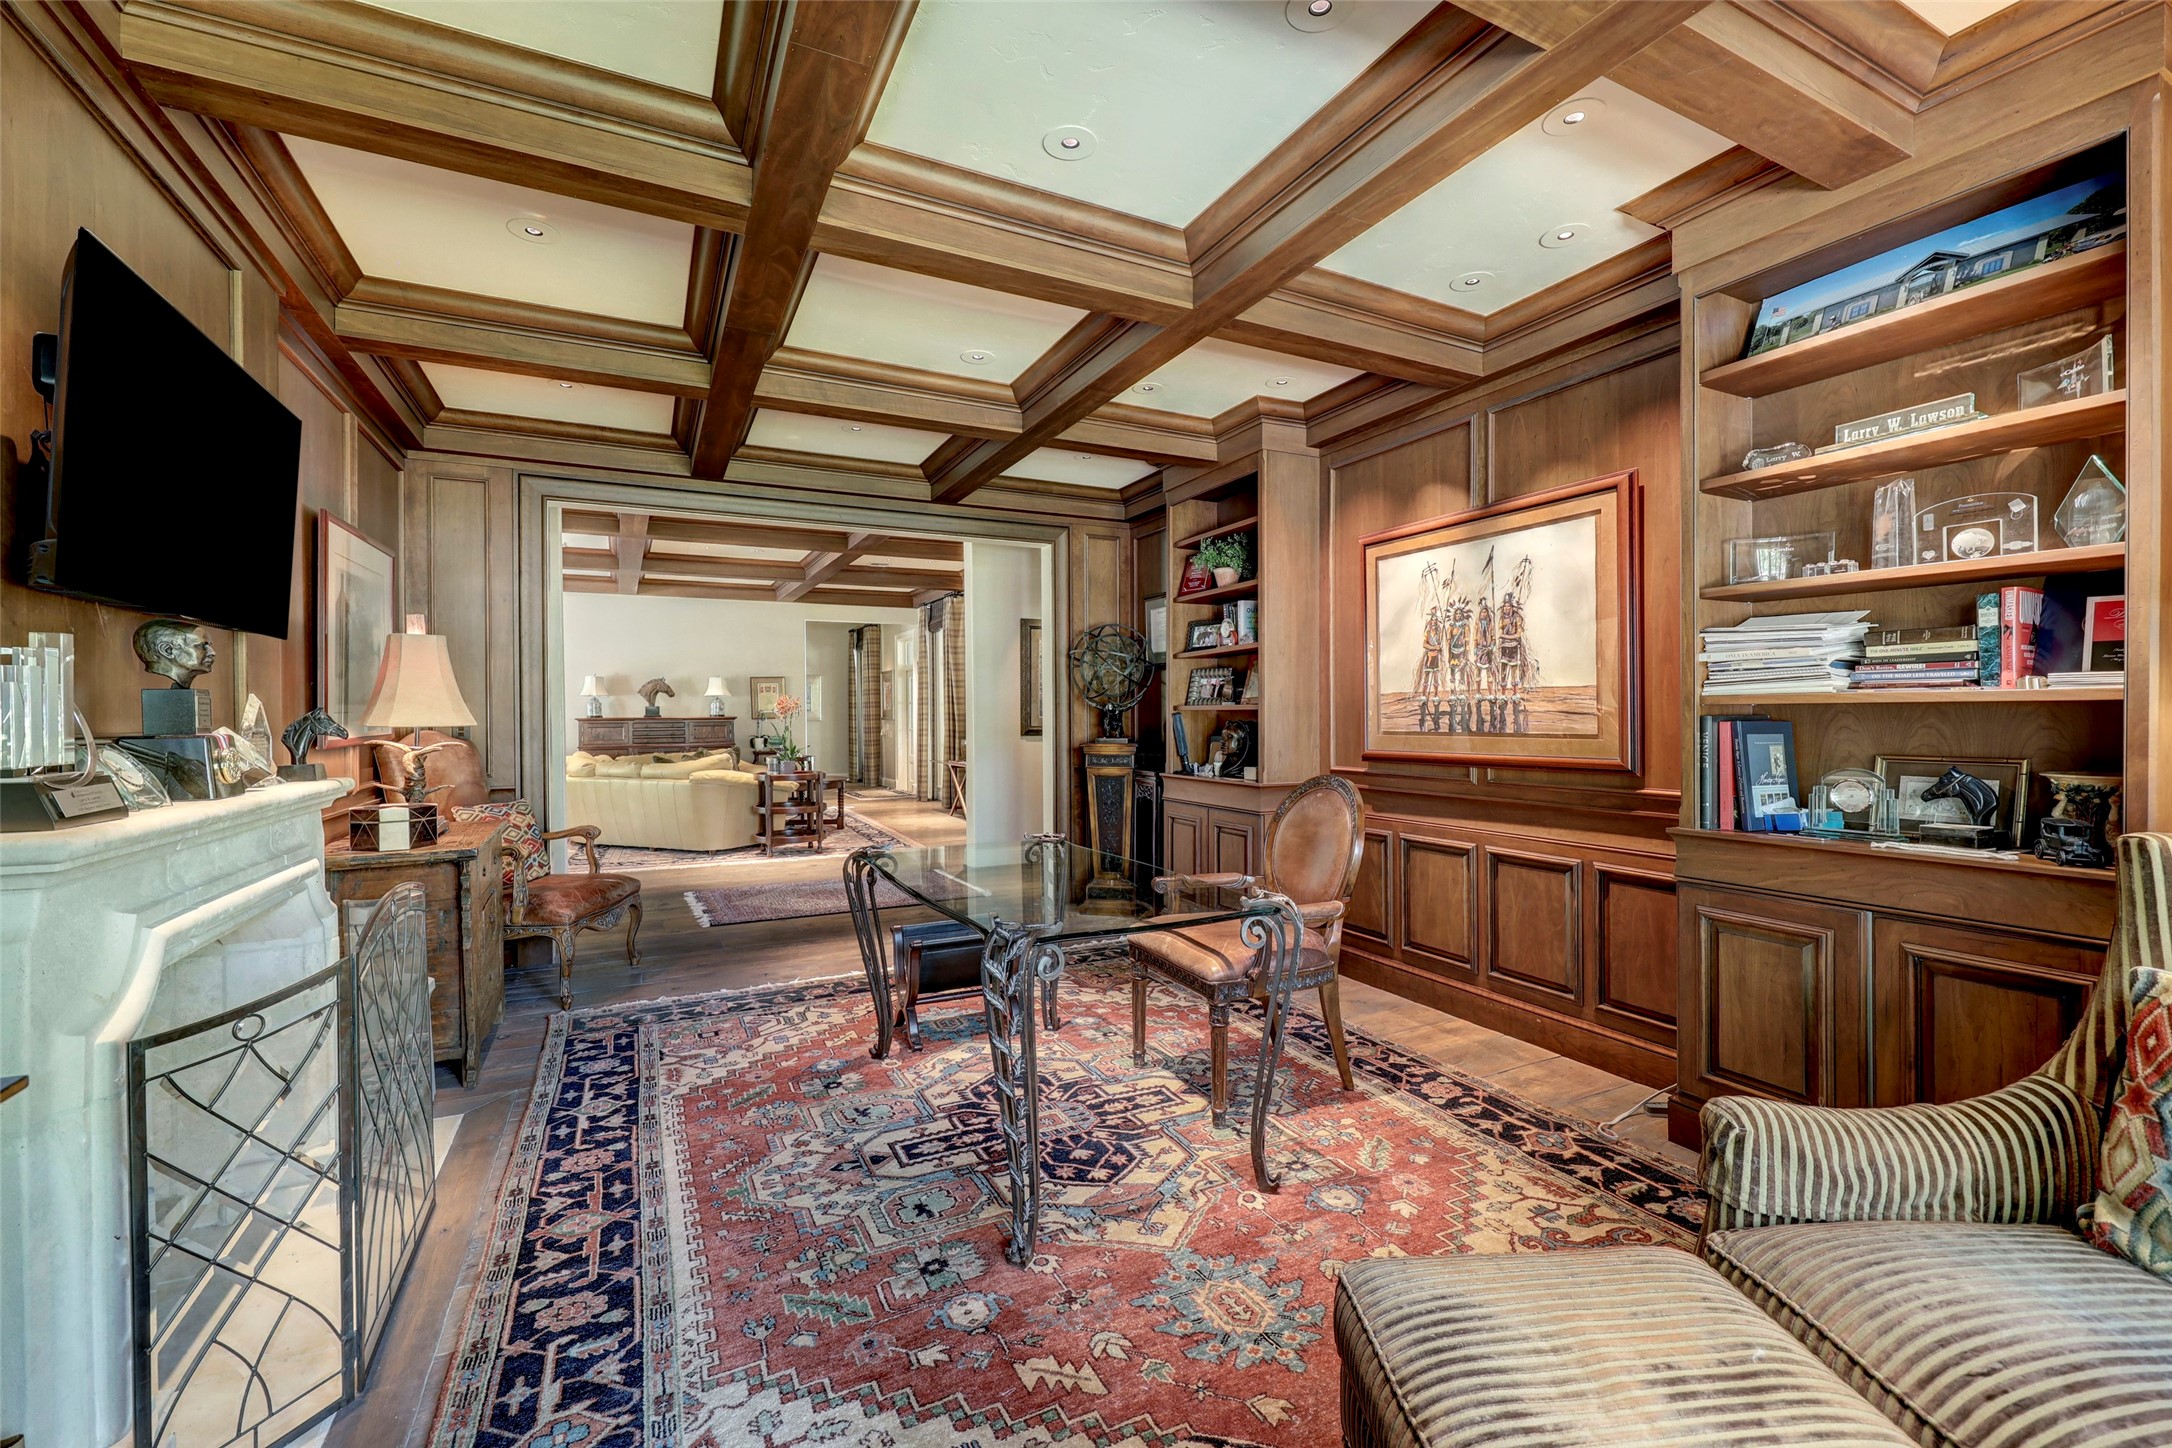 The study includes stone fireplace, beamed ceiling, and stunning cabinetry.